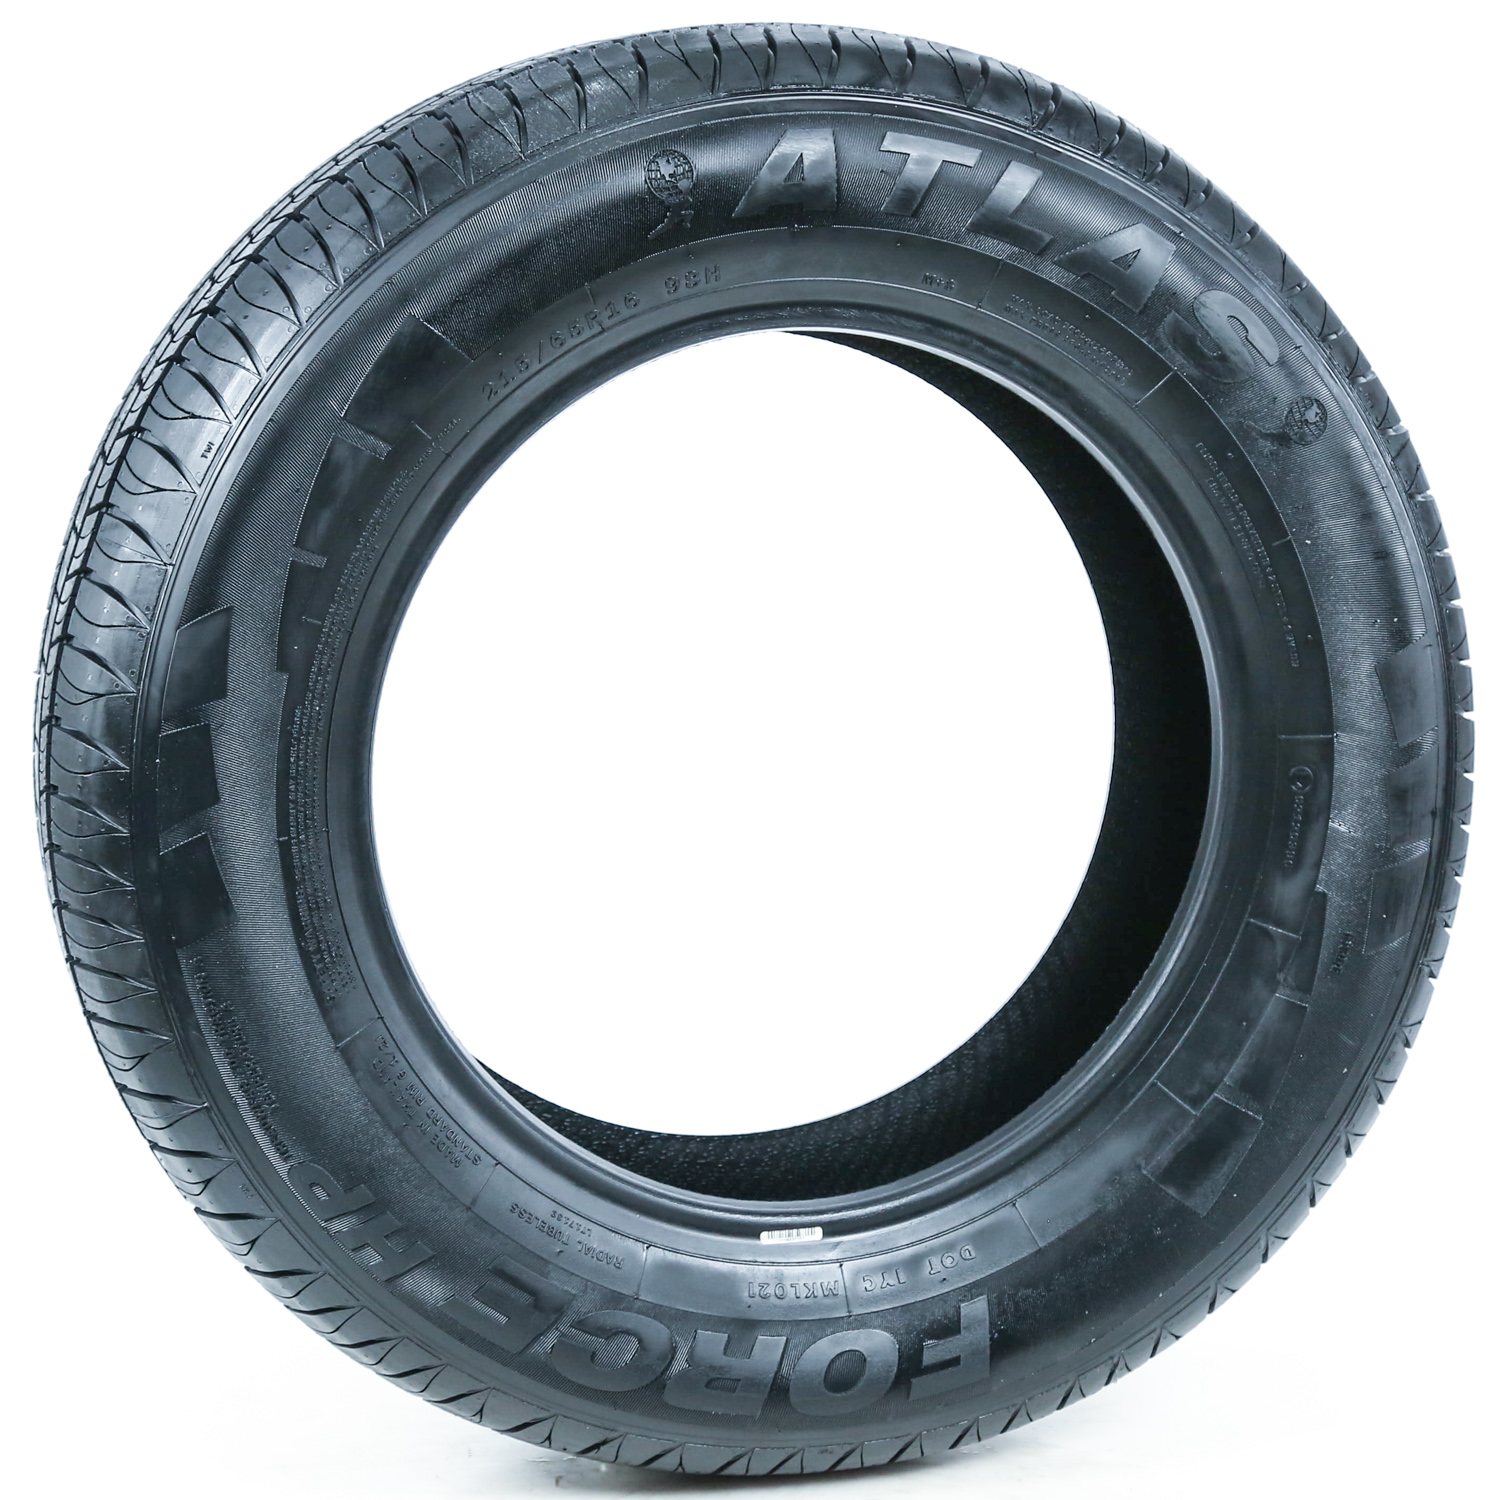 1 New Atlas Force Hp - P215/60r17 Tires 2156017 215 60 17